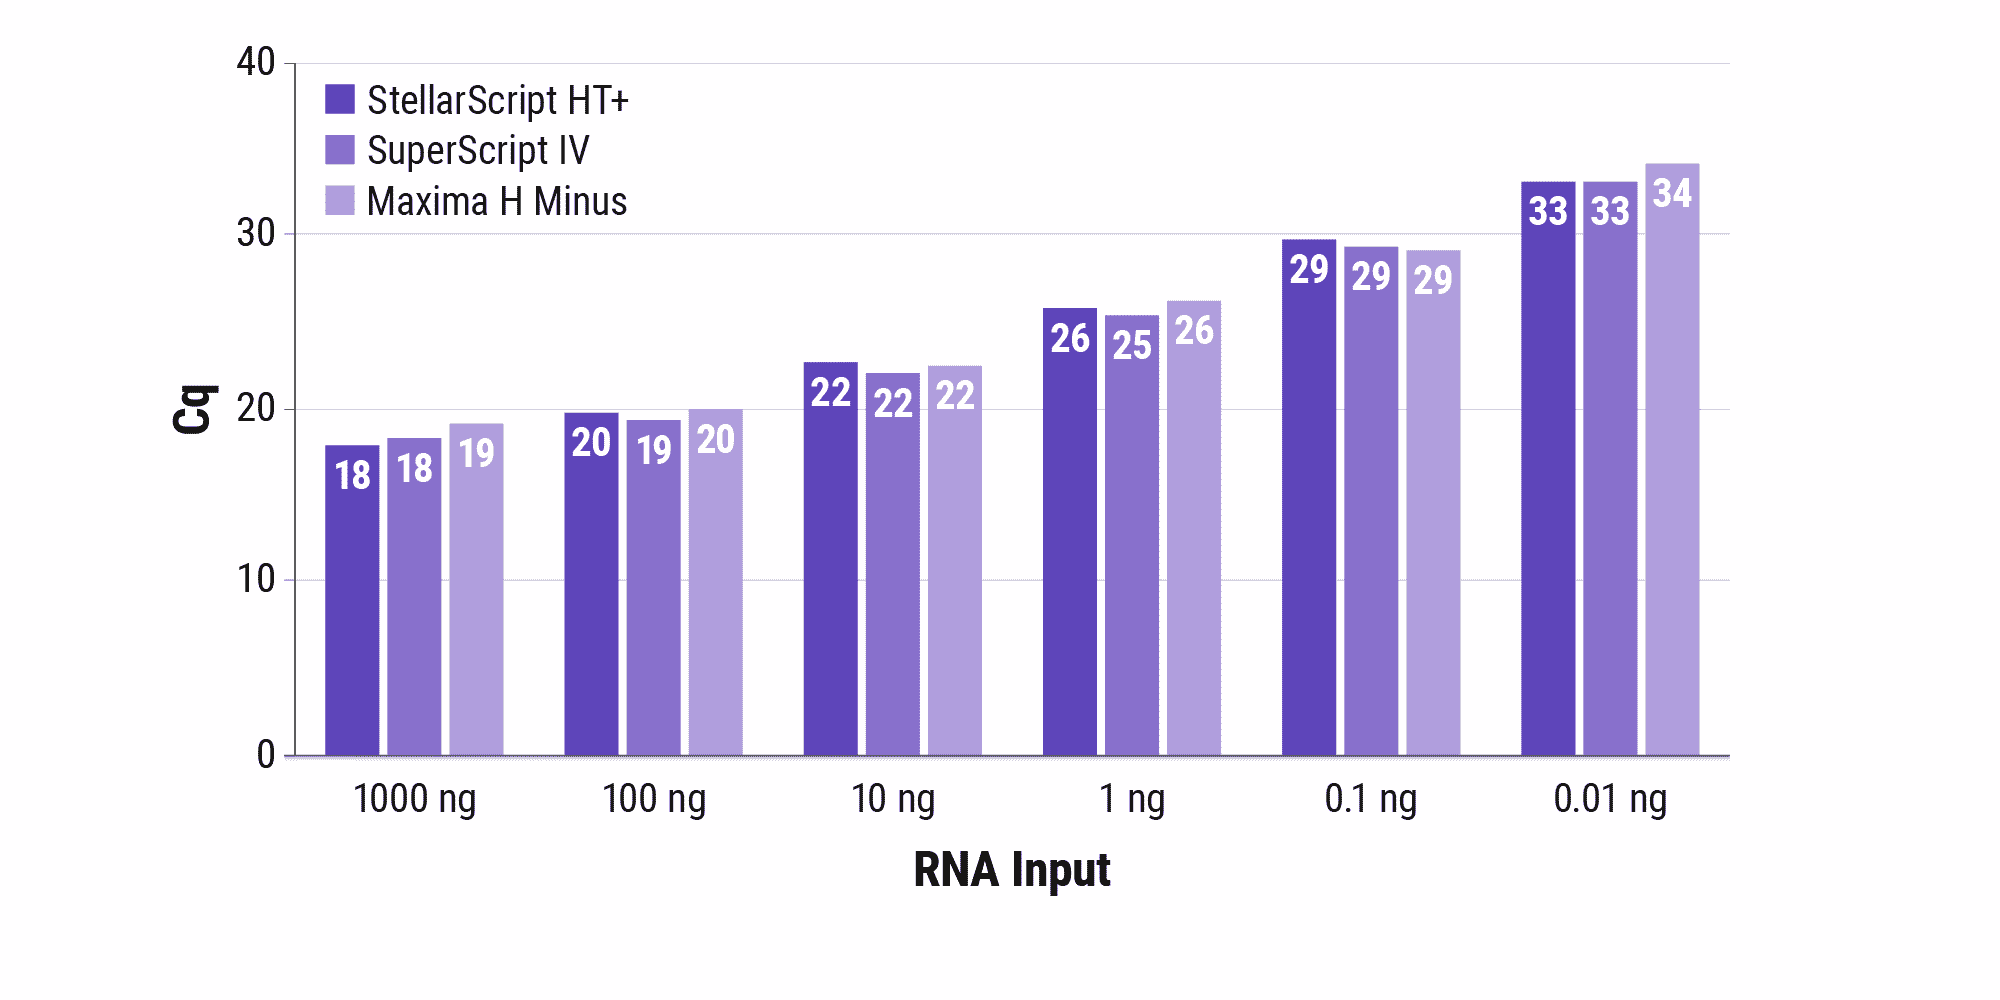 Figure 3. Generate cDNA from vanishingly low RNA inputs. Watchmaker’s StellarScript HT+ and ThermoFisher Scientific’s SuperScript IV and Maxima H Minus were run in oligo-dT and randomly primed first strand synthesis at 50°C for 40 minutes using 1000 ng to 0.01 ng total liver RNA as template. Resulting cDNA yields were assessed via qPCR. StellarScript HT+ showed overall equivalency to SuperScript IV and Maxima H Minus.